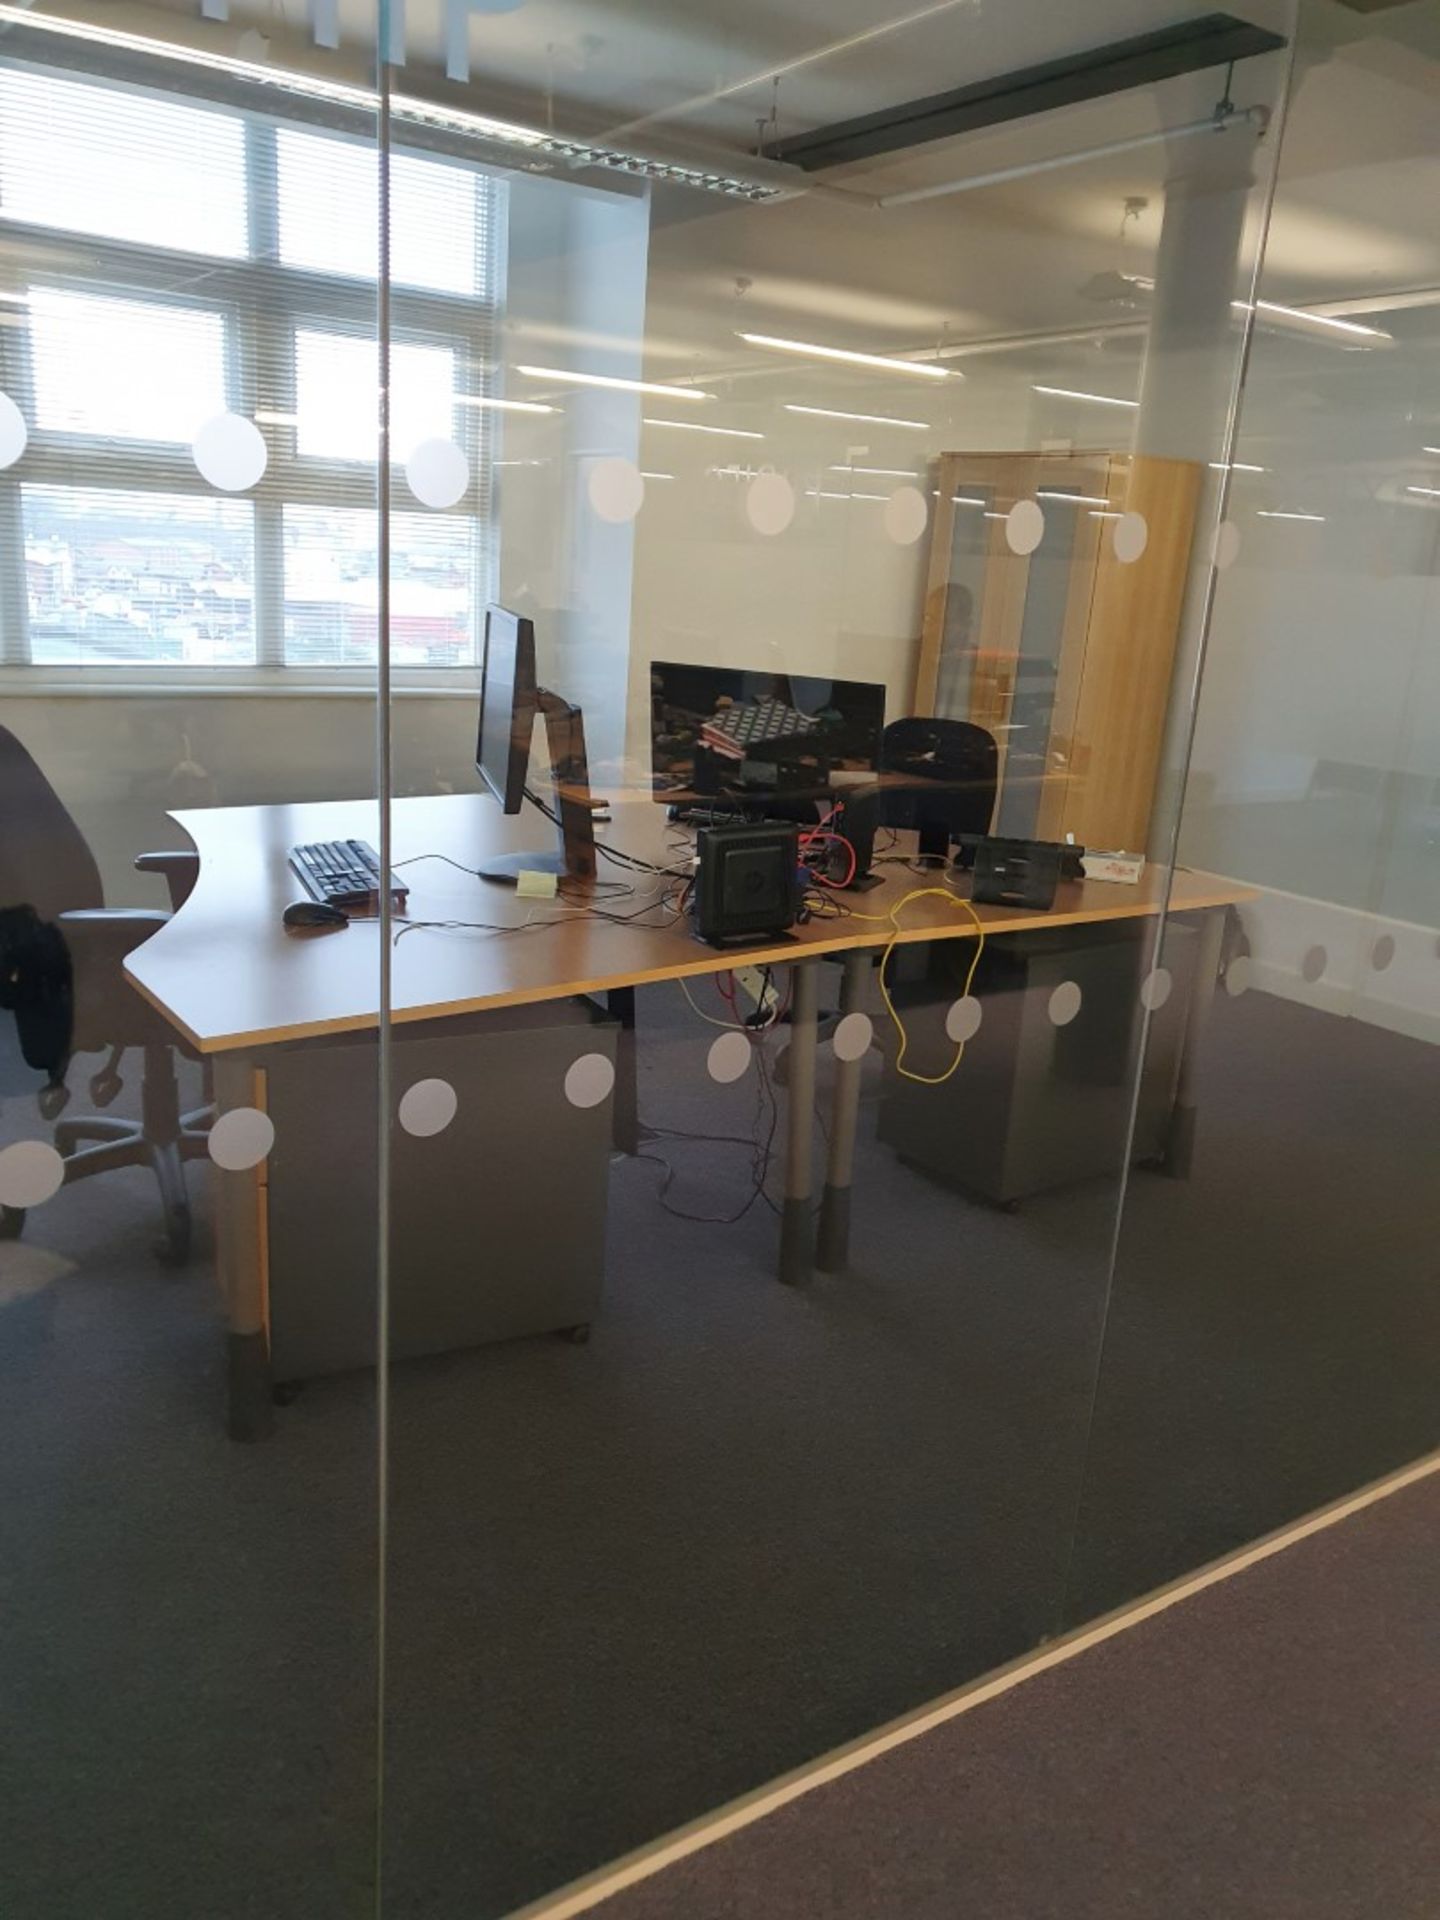 Lot of Office Glass Partition Panels - CL467 - Location: Manchester M12 - Image 2 of 11